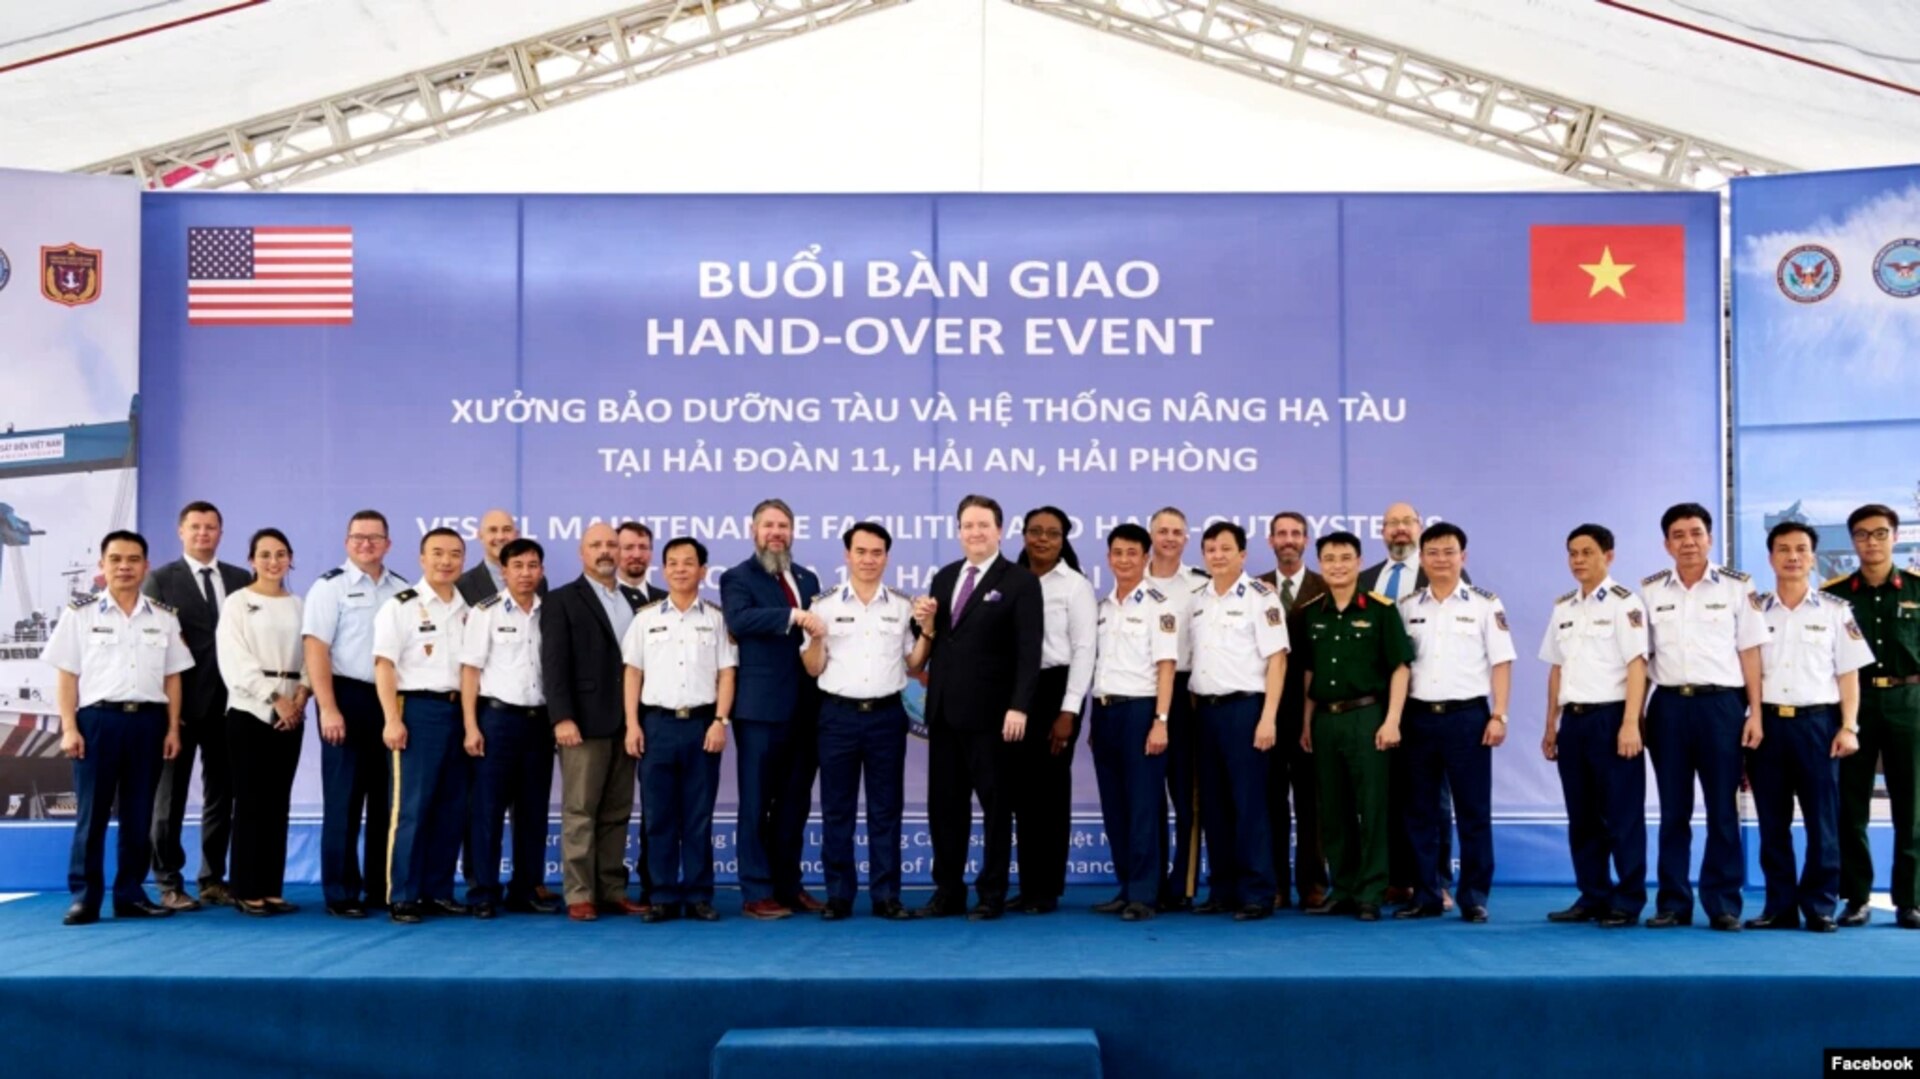 The United States handed over a ship maintenance repair facility to the Vietnam Coast Guard at a squadron in Hai Phong. Photo: Facebook U.S. Embassy in Hanoi posted May 4, 2022.